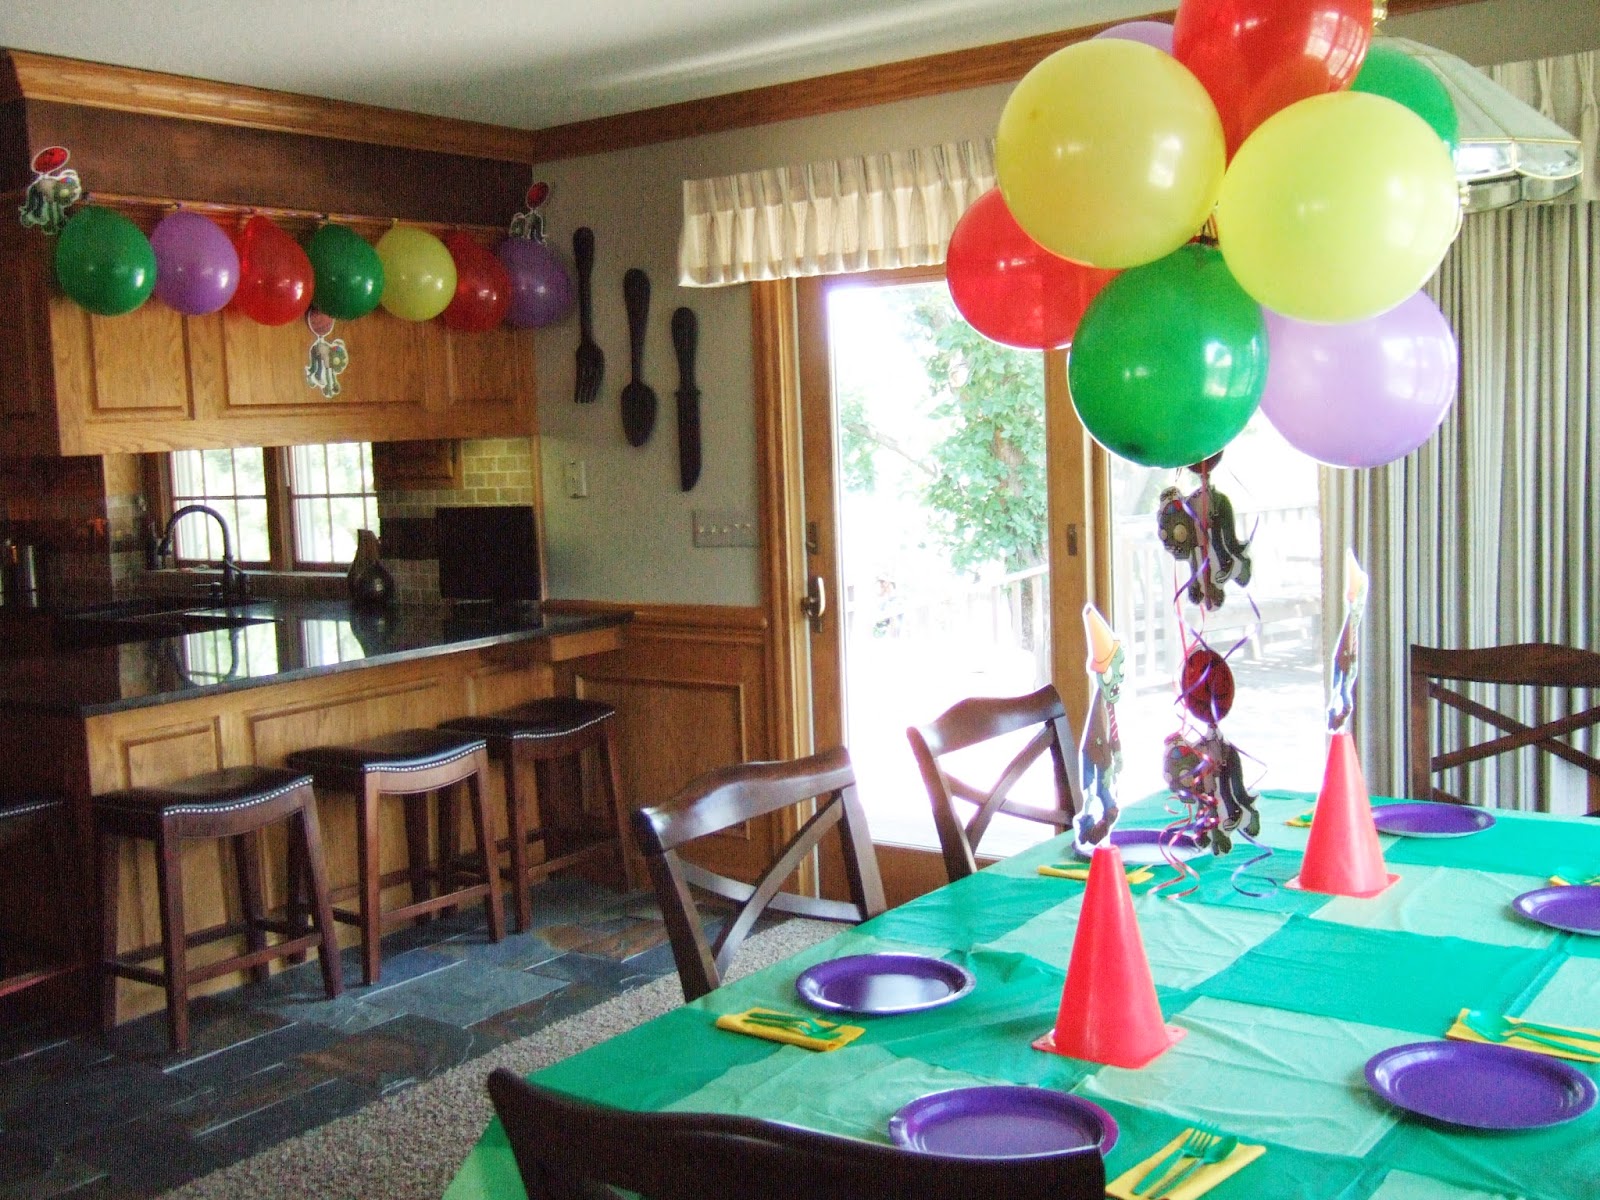 Jacobs Family Blog: Plants Vs. Zombies Birthday Party